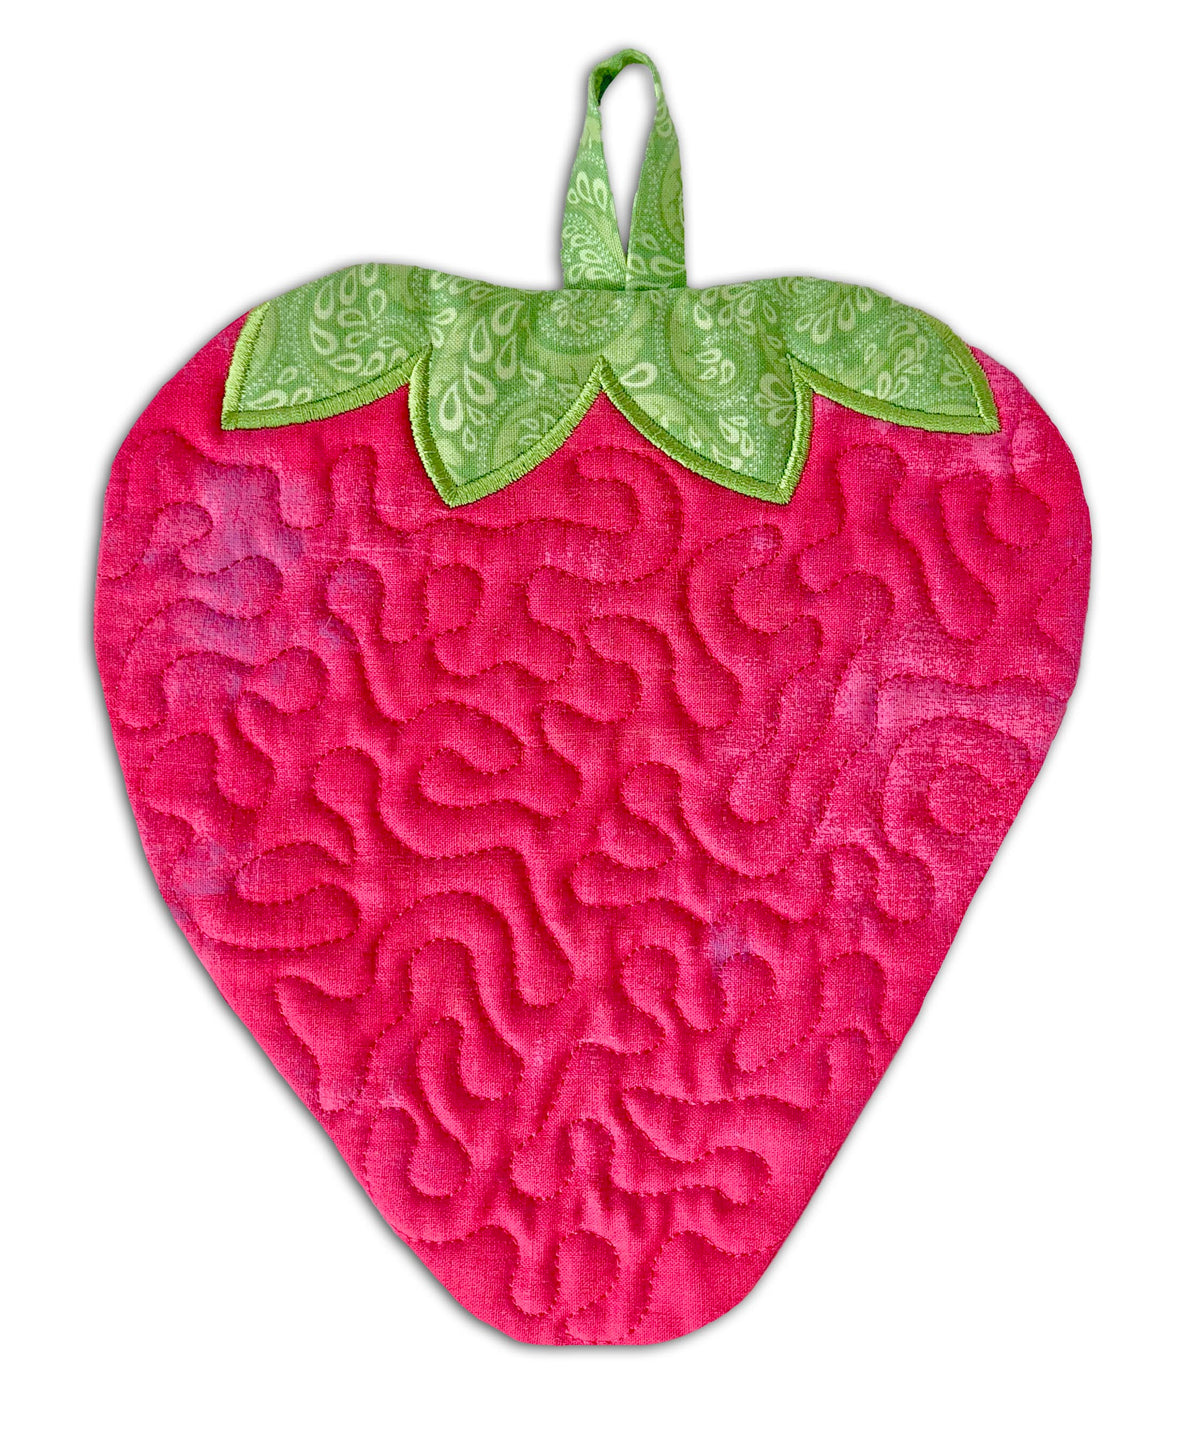 Strawberry Trivet In the Hoop Embroidery Design